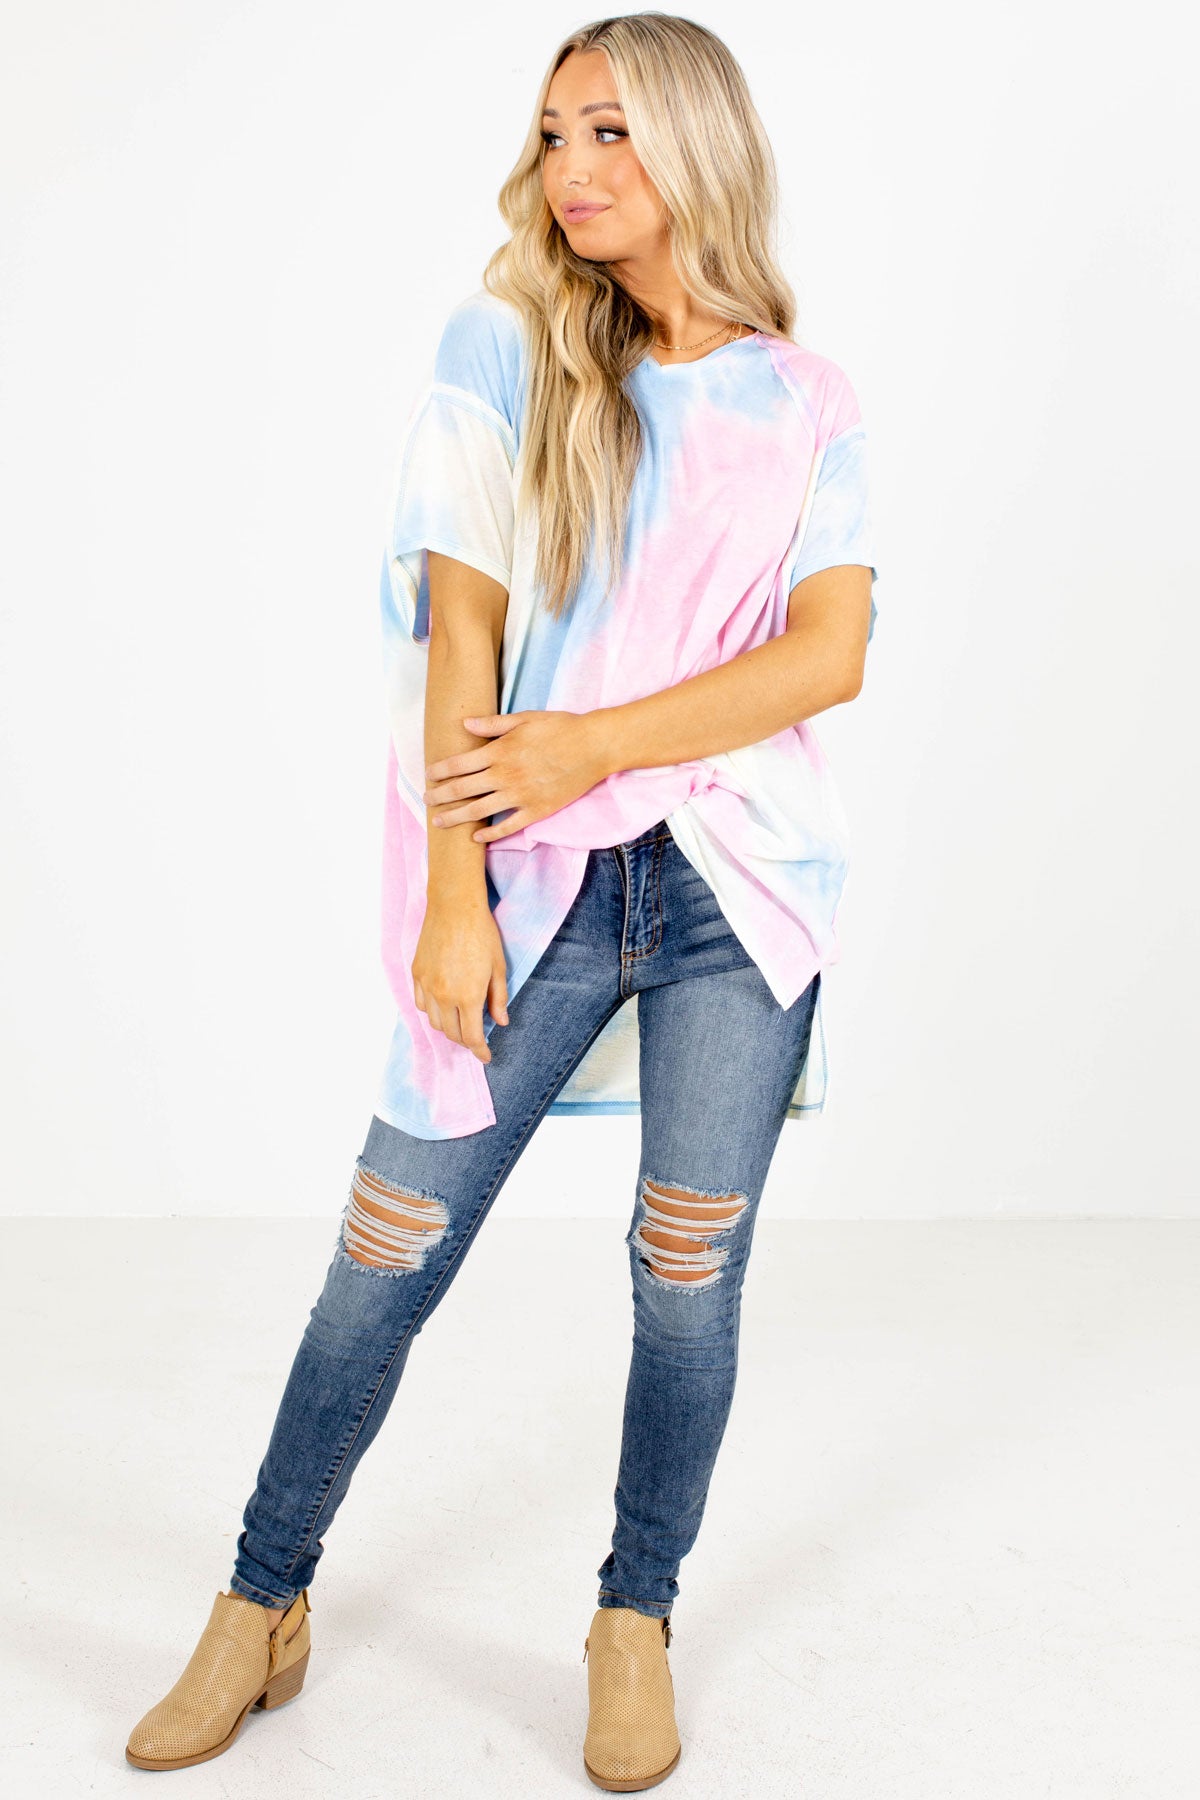 Blue and Pink Tie Dye Top